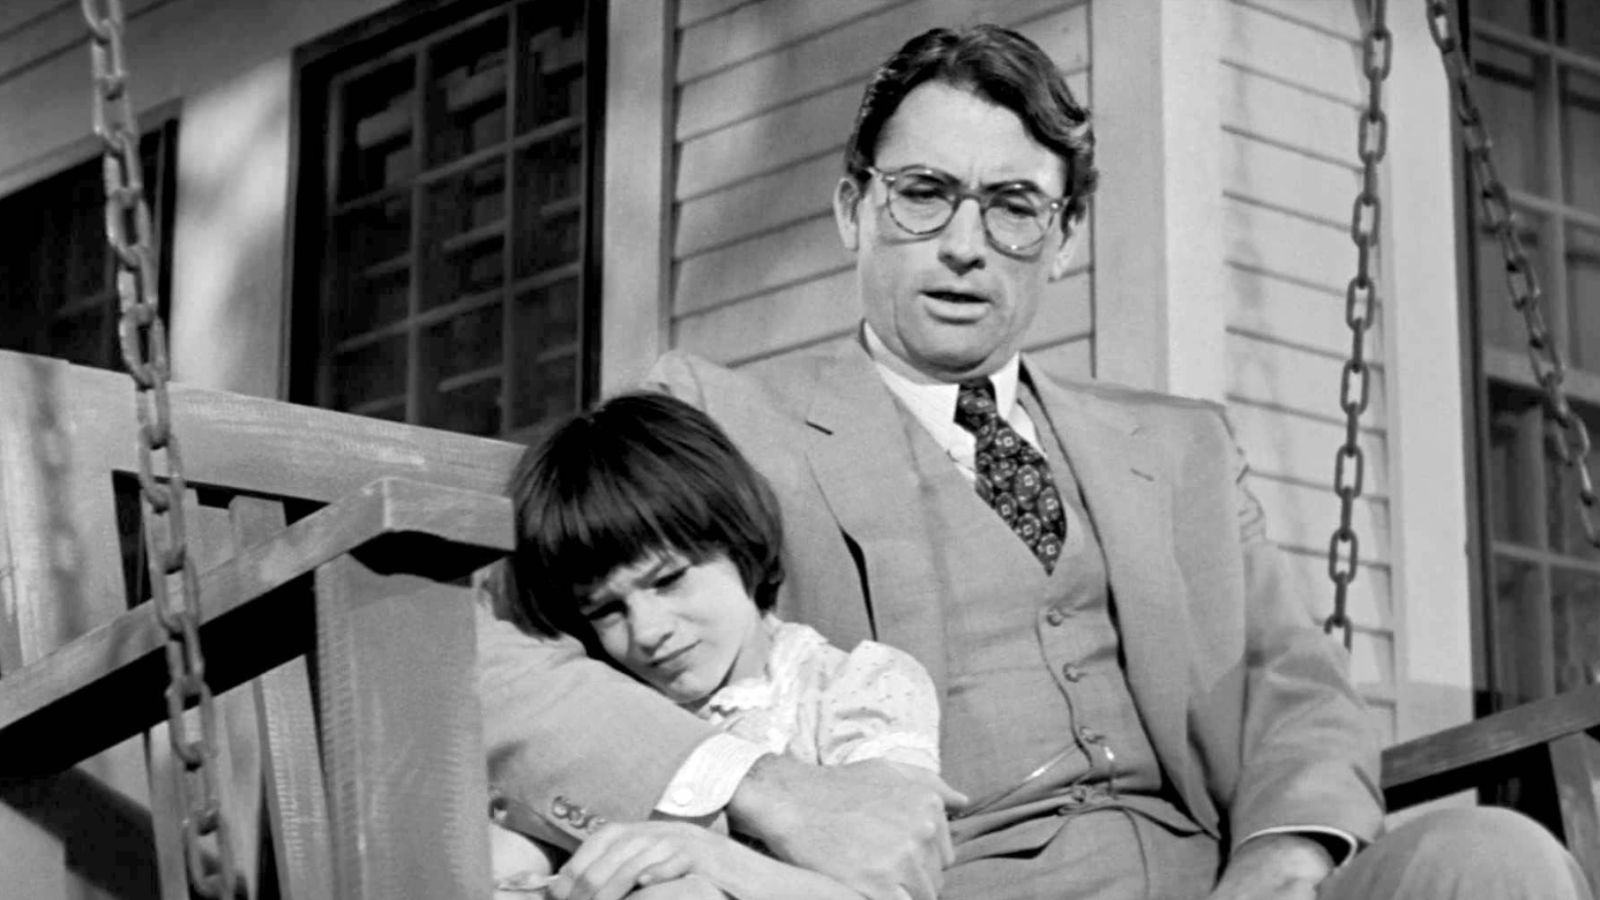 <p><span> From the sleepy streets of Maycomb to the racial injustices lurking underneath, Harper Lee’s iconic tale of courage and morality was brilliantly adapted for the screen. Gregory Peck’s embodiment of the noble Atticus Finch won hearts and awards alike. When we think of Atticus, we see Peck, and that’s Hollywood done right!</span></p>